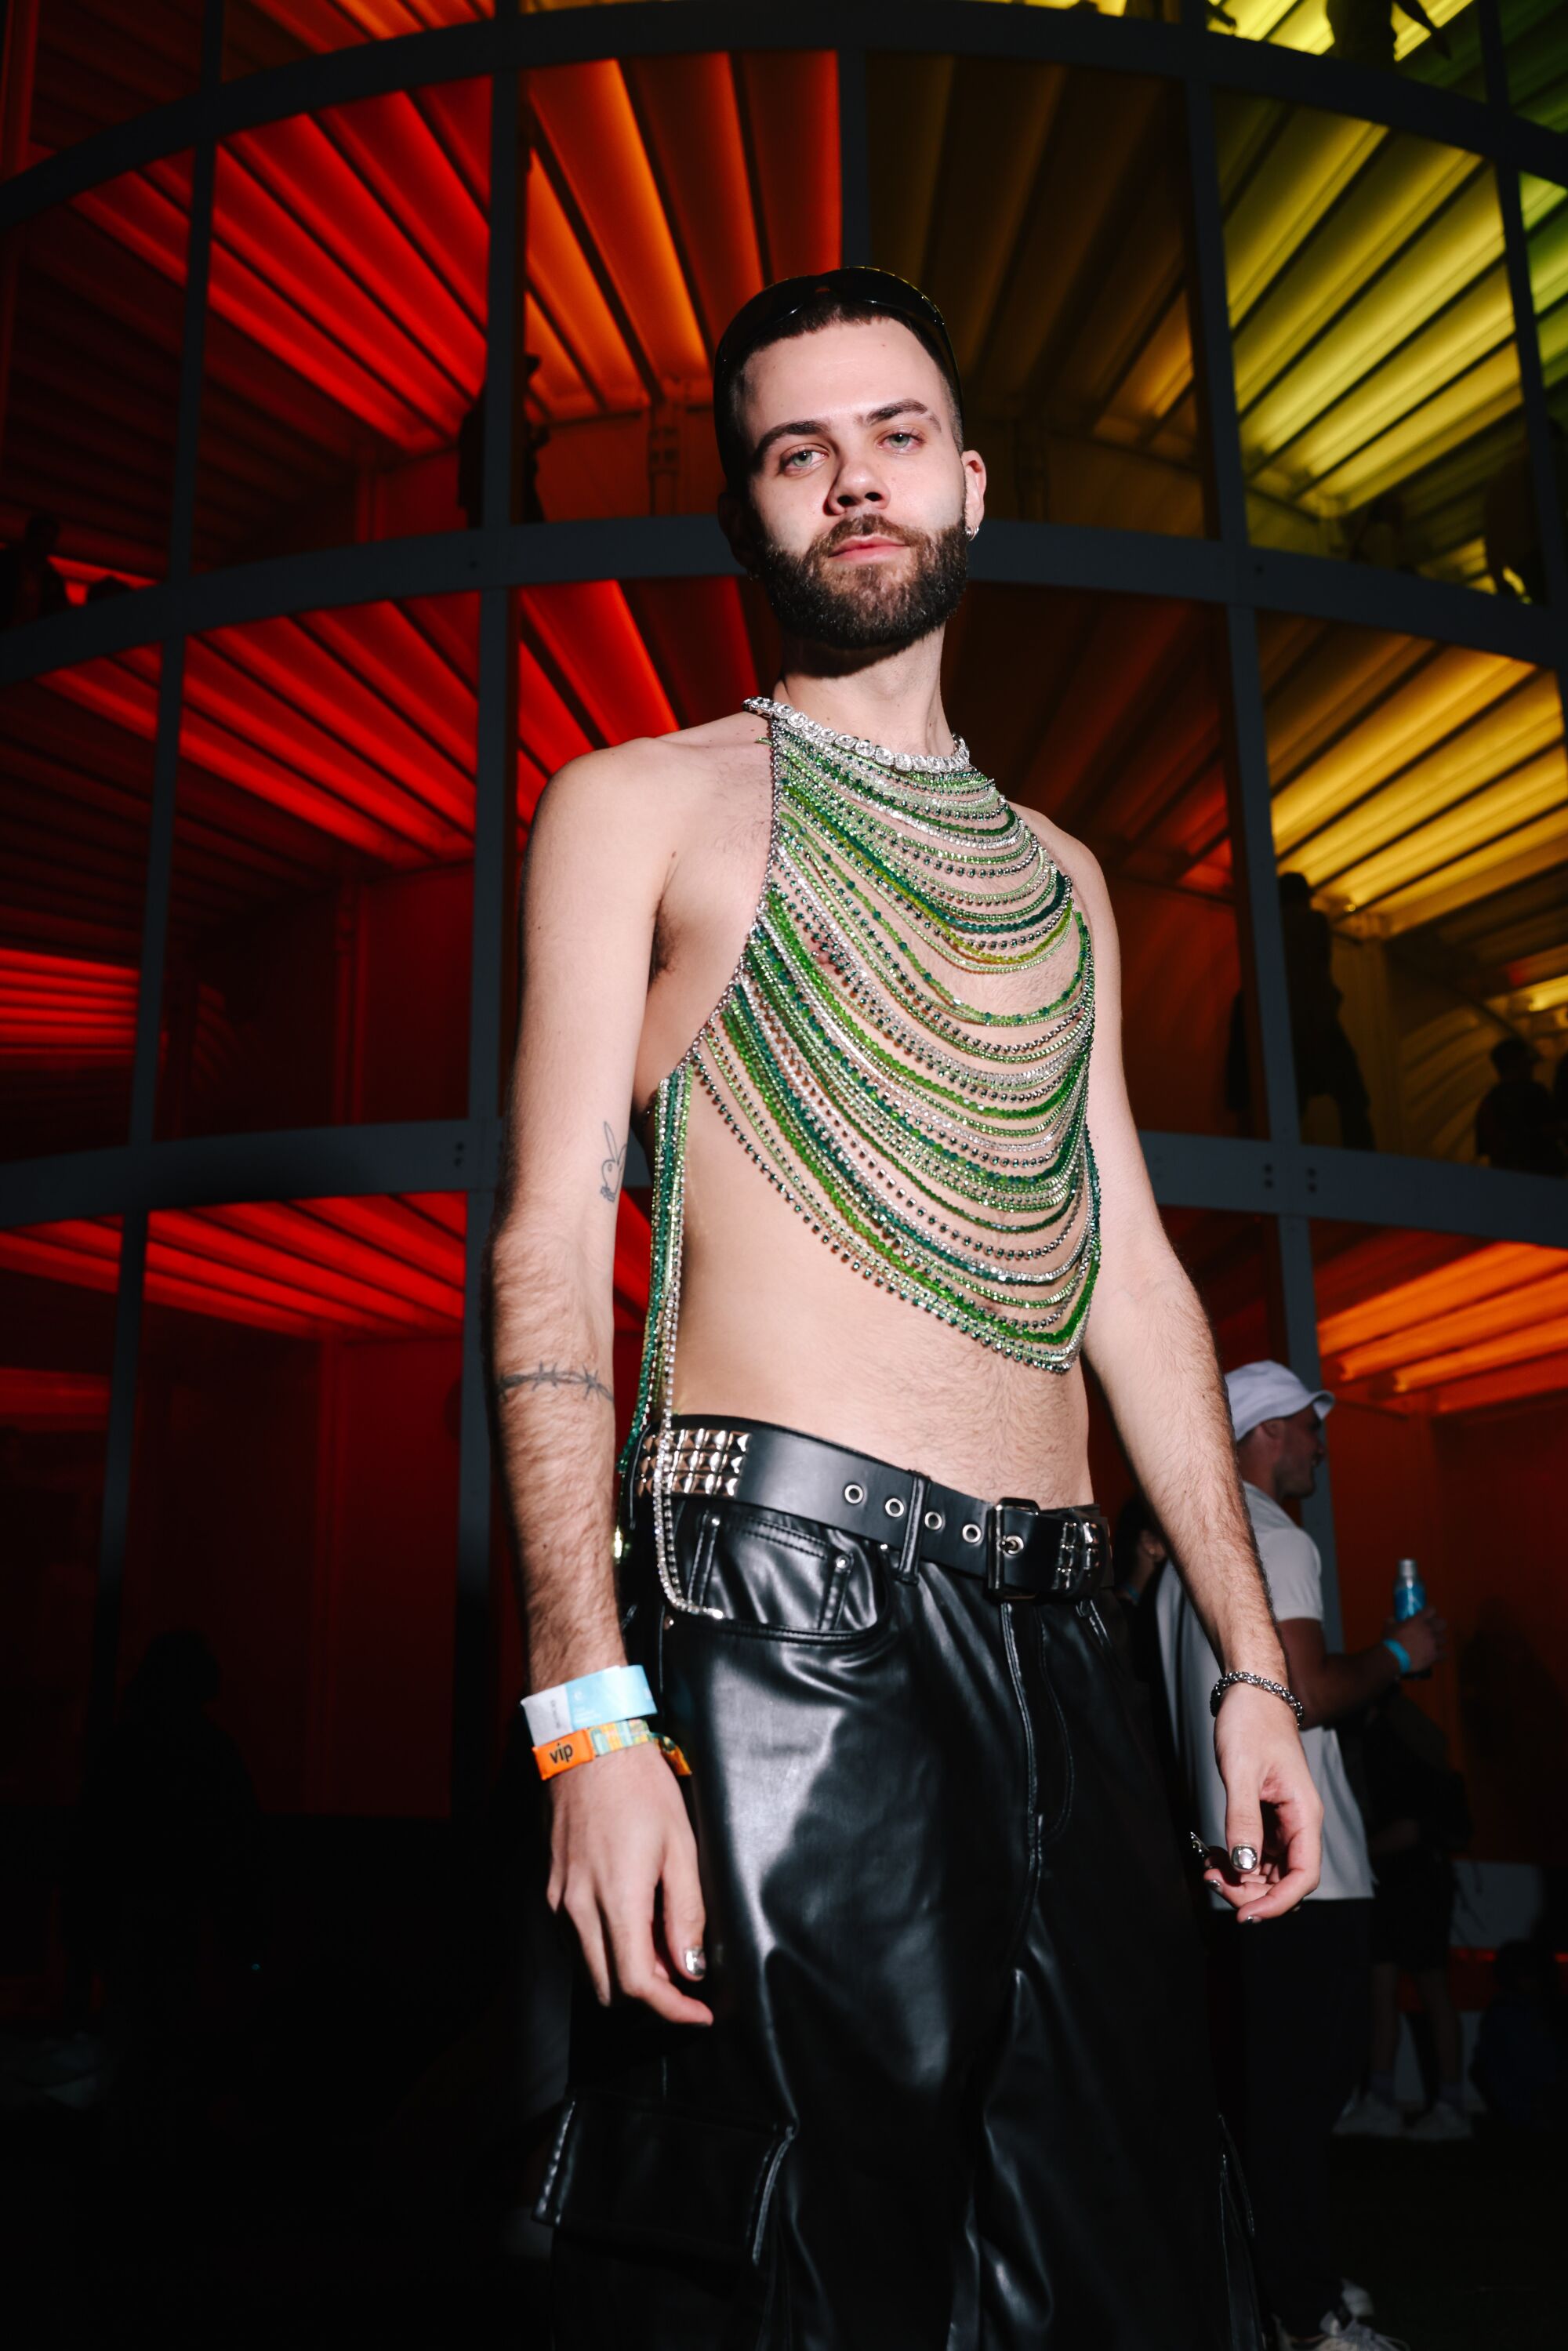 A man wearing chains poses in front of an art piece